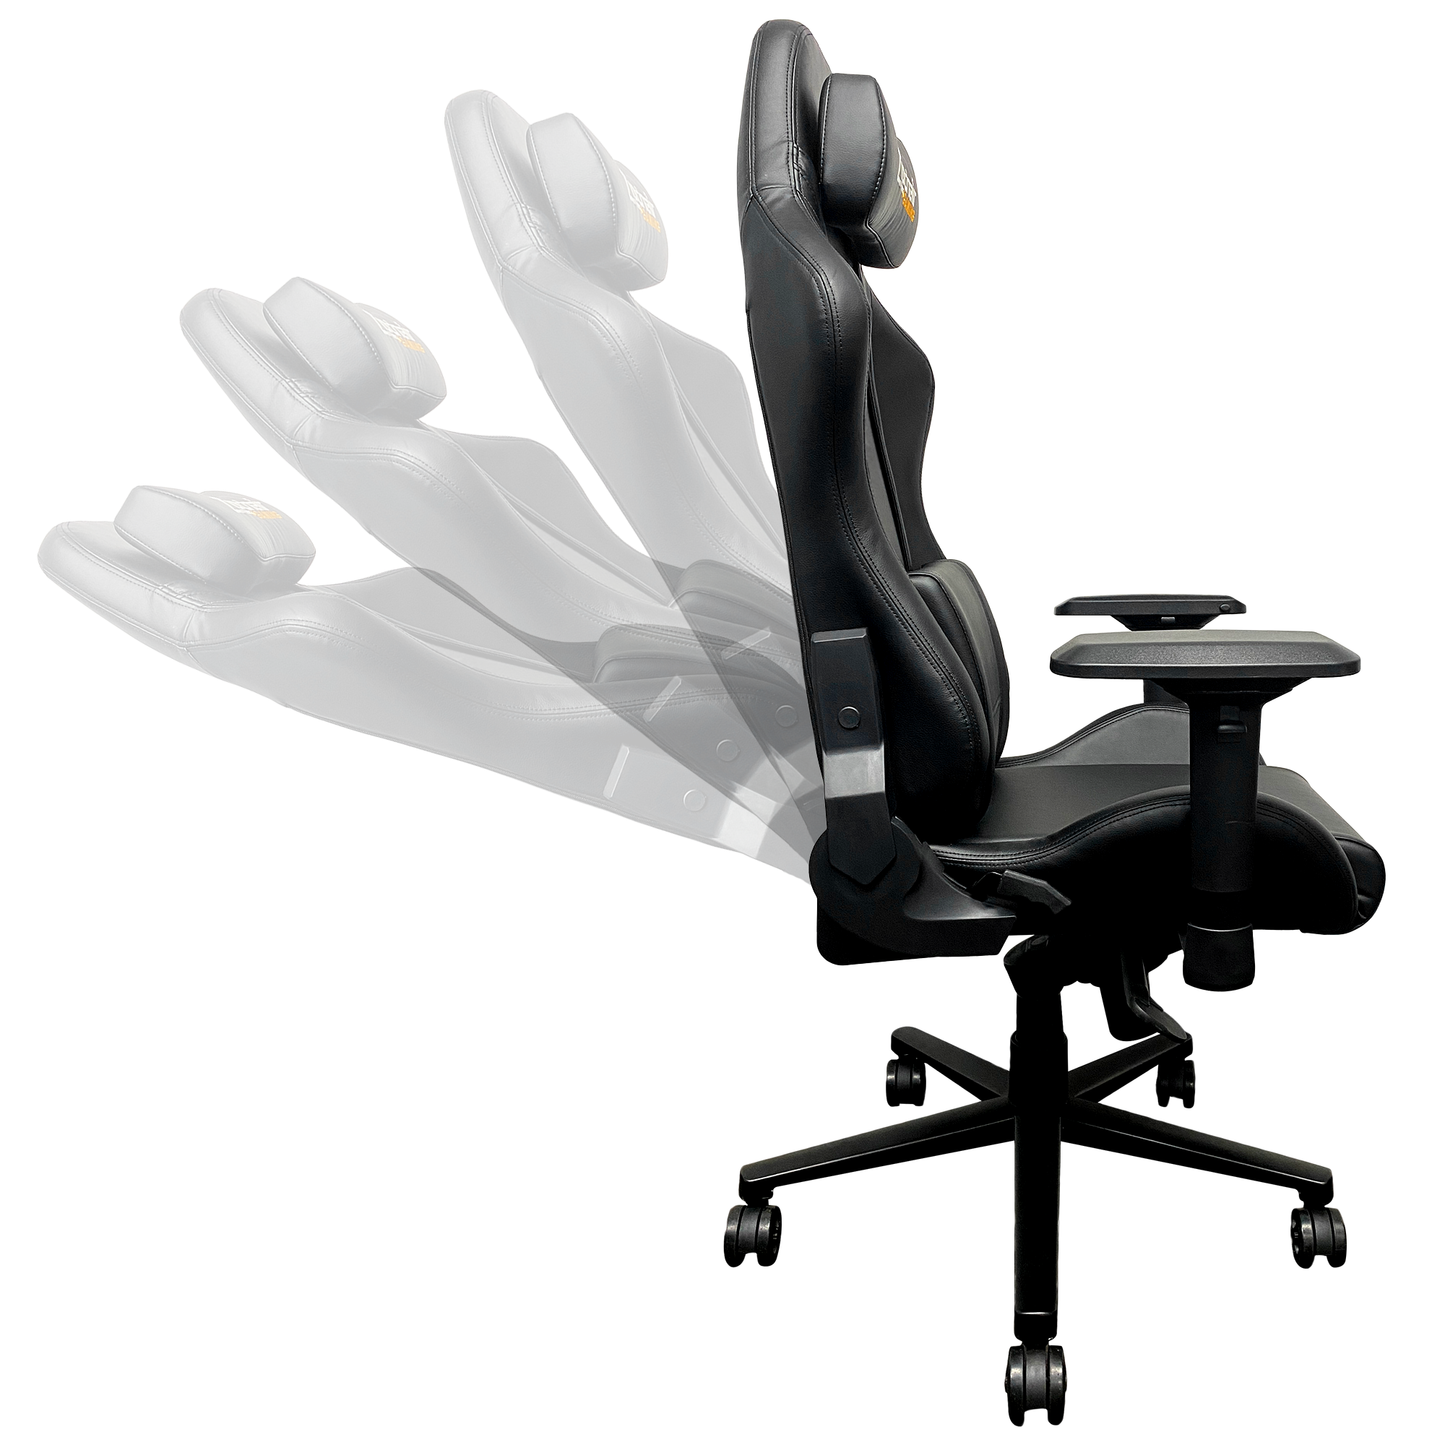 Xpression Pro Gaming Chair with Buick logo